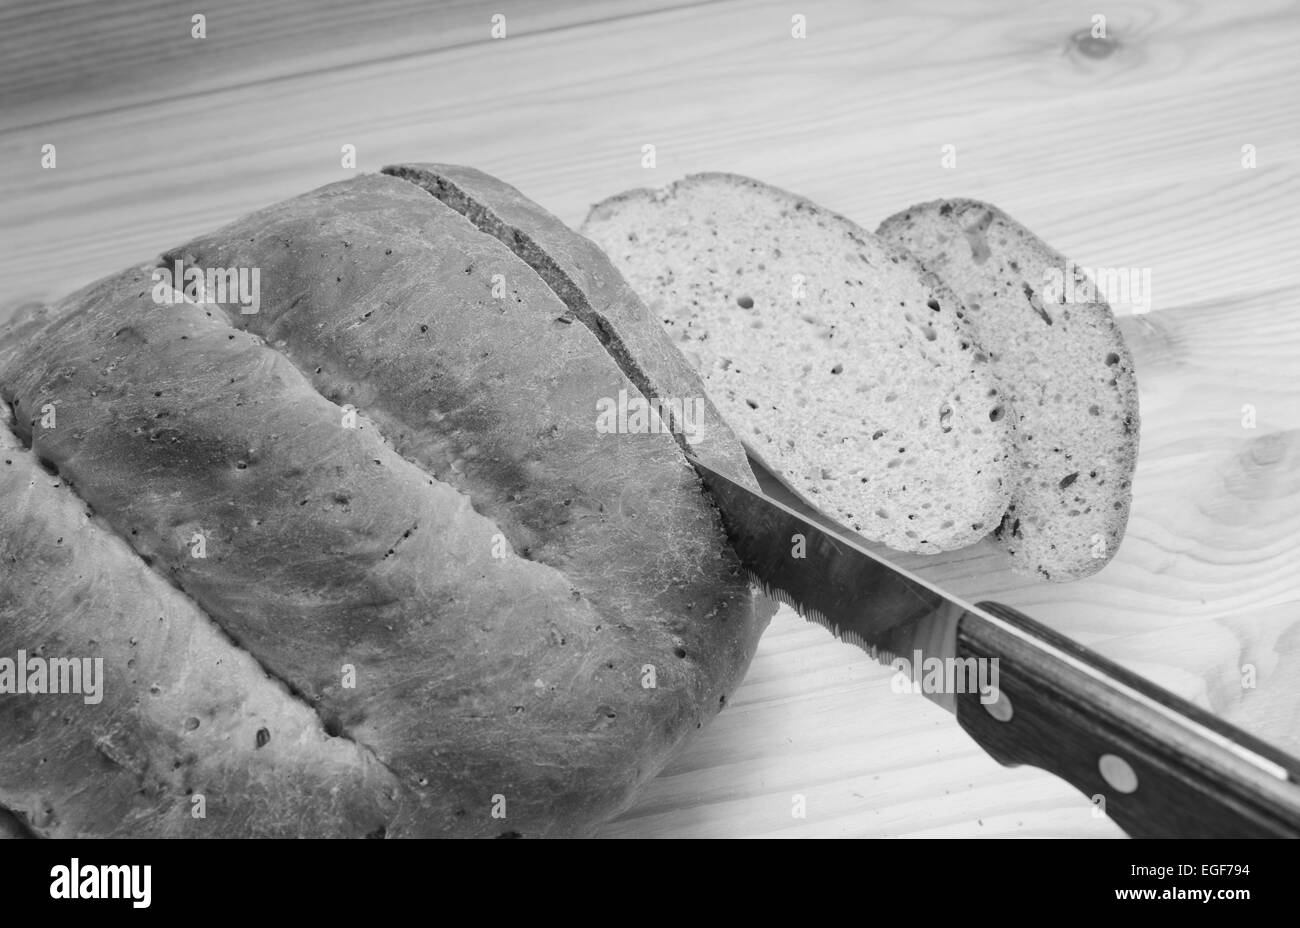 Cutting slices of bread from a freshly baked loaf on a wooden table - monochrome processing Stock Photo